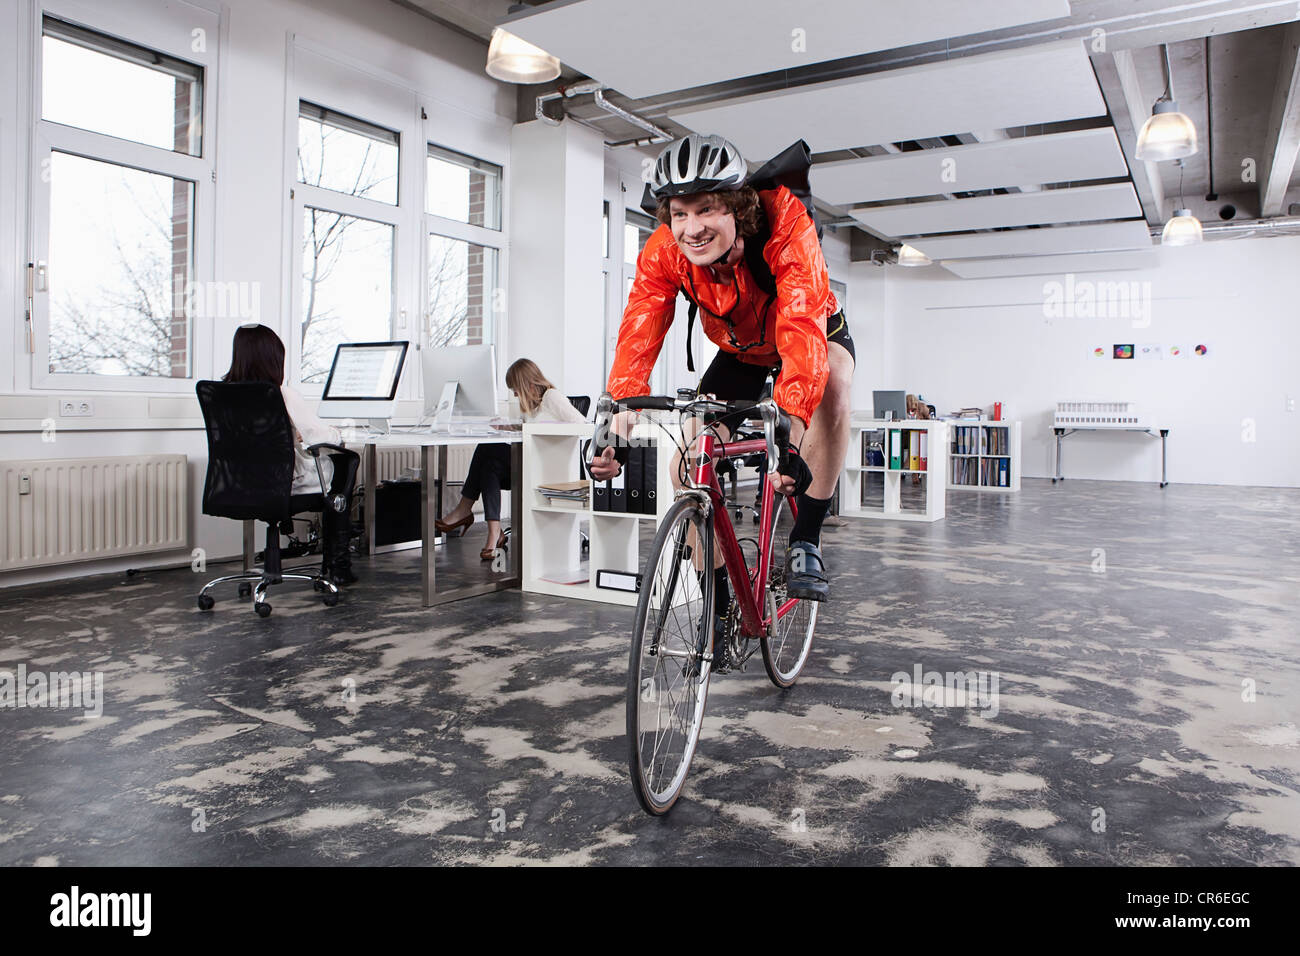 Germany, Bavaria, Munich, Courier man cycling in office, colleagues working Stock Photo